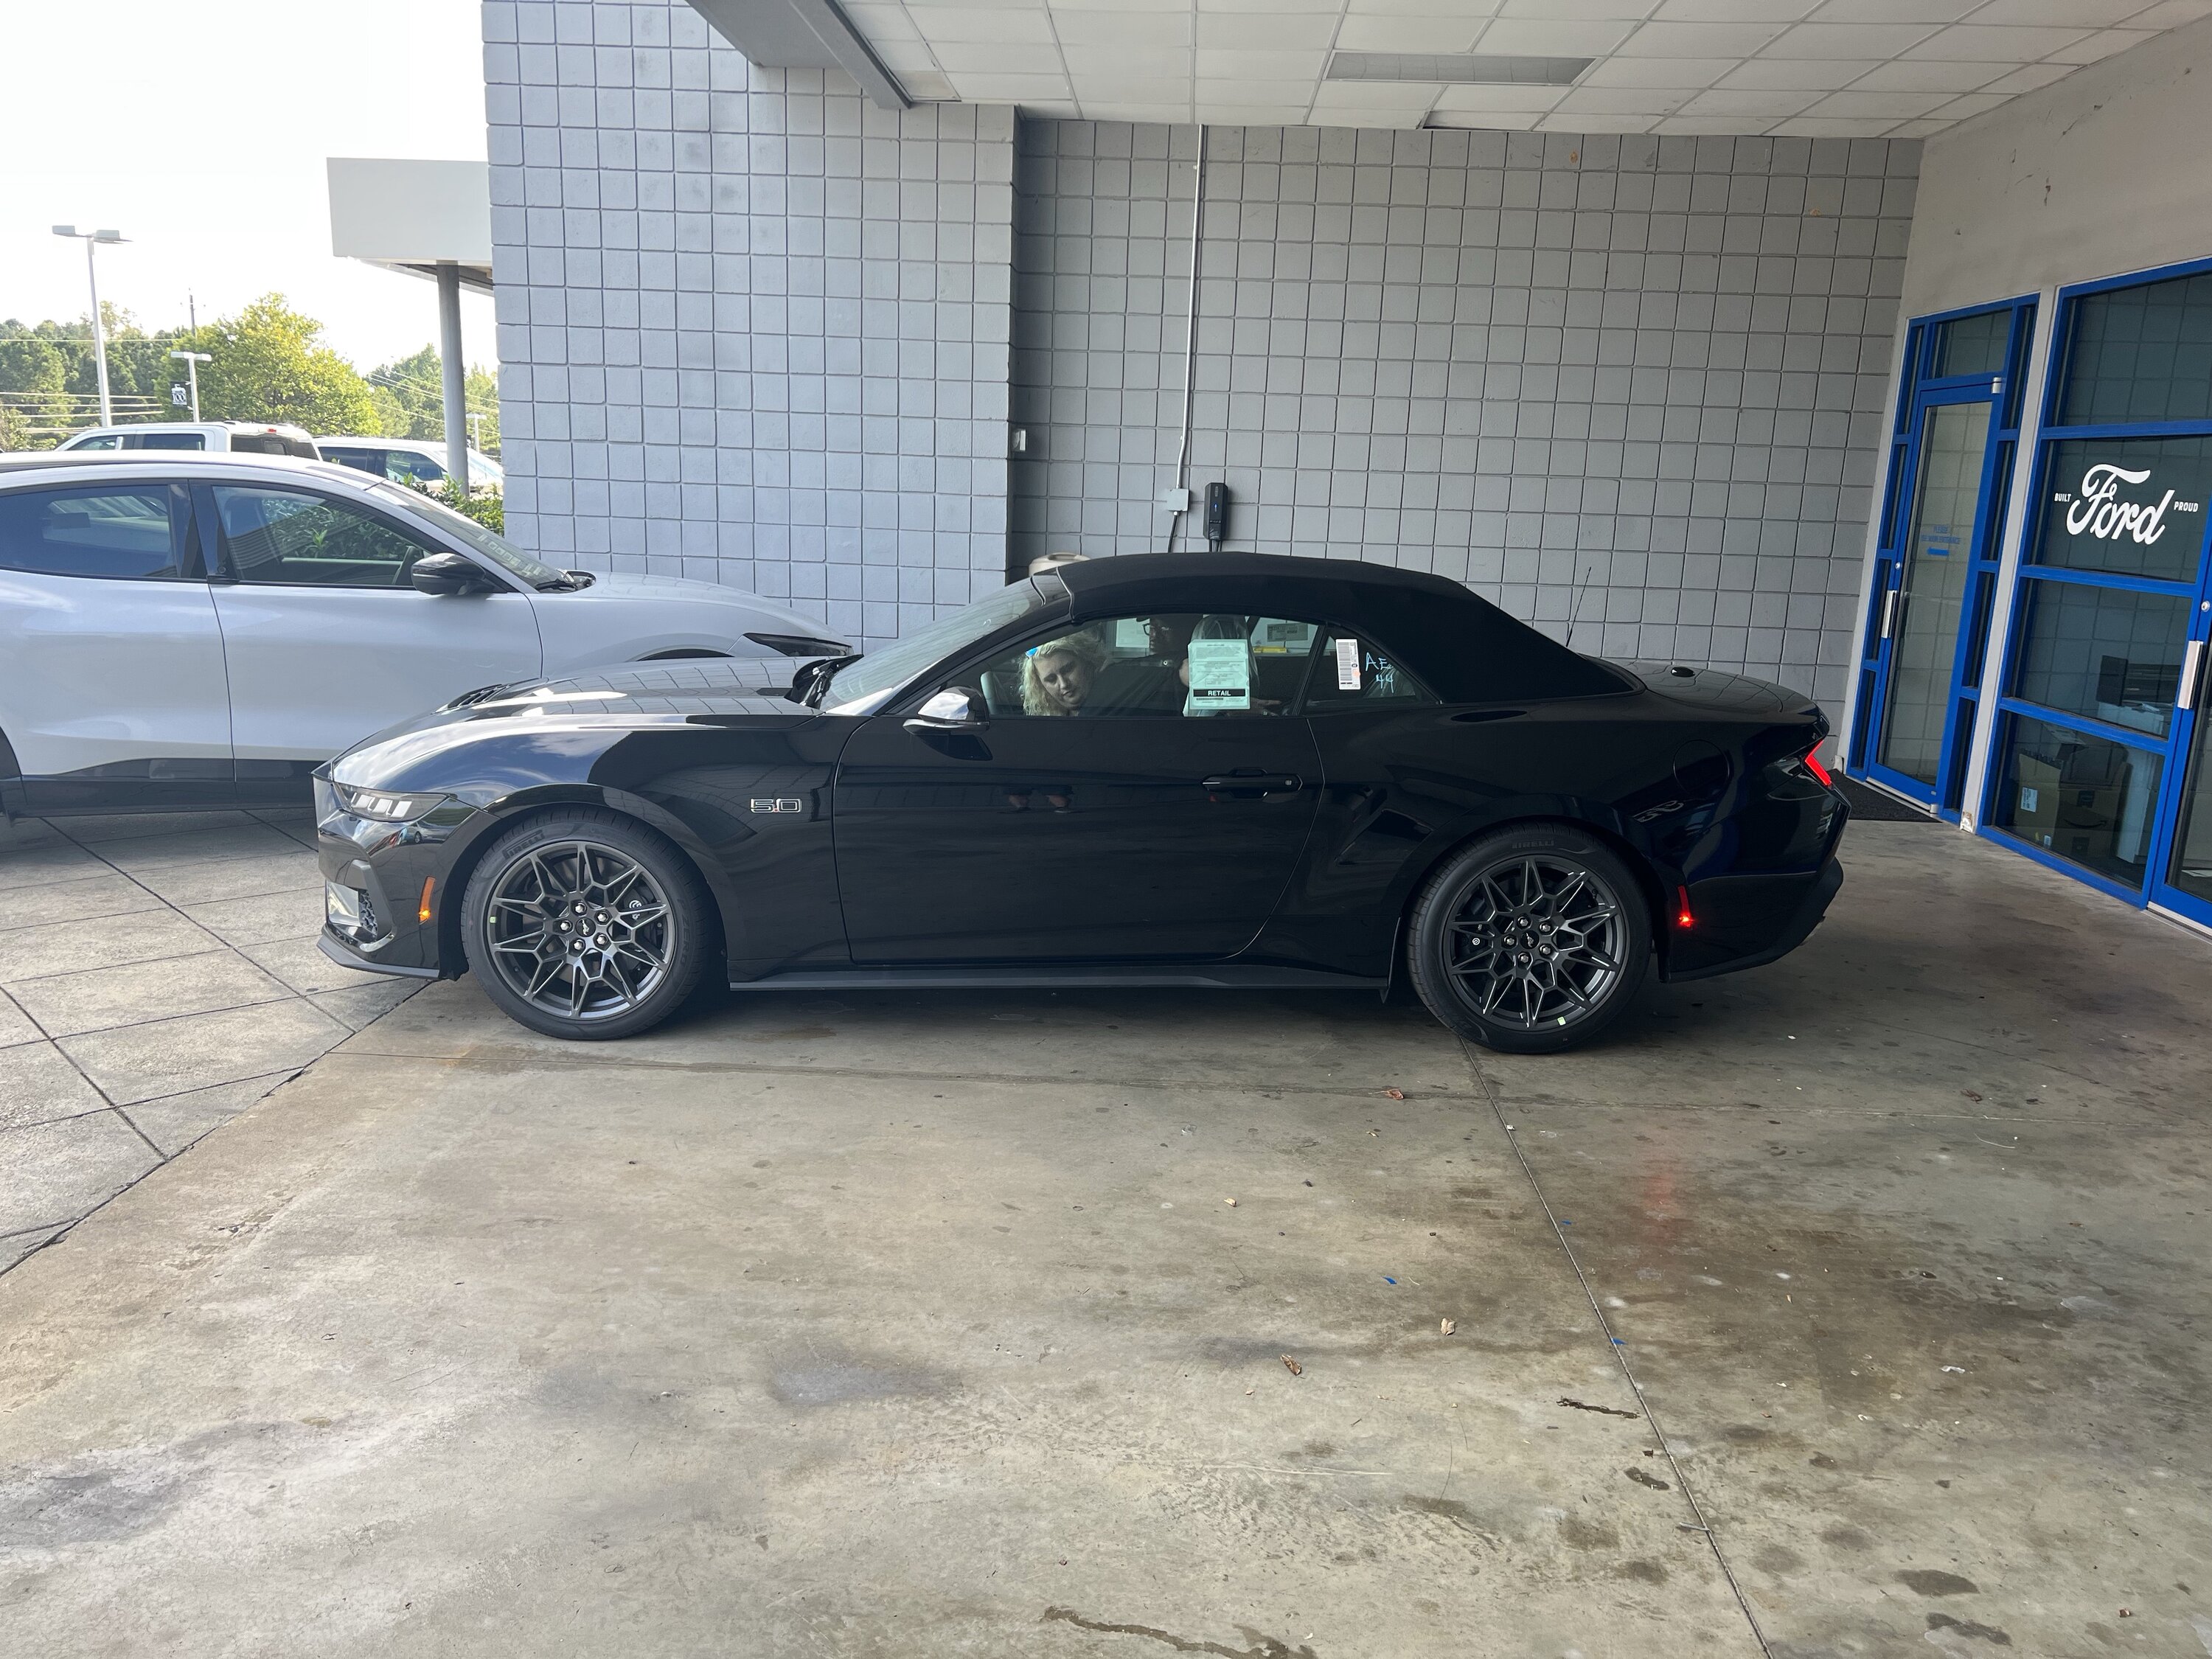 S650 Mustang Triple black GT convertible just arrived IMG_4841